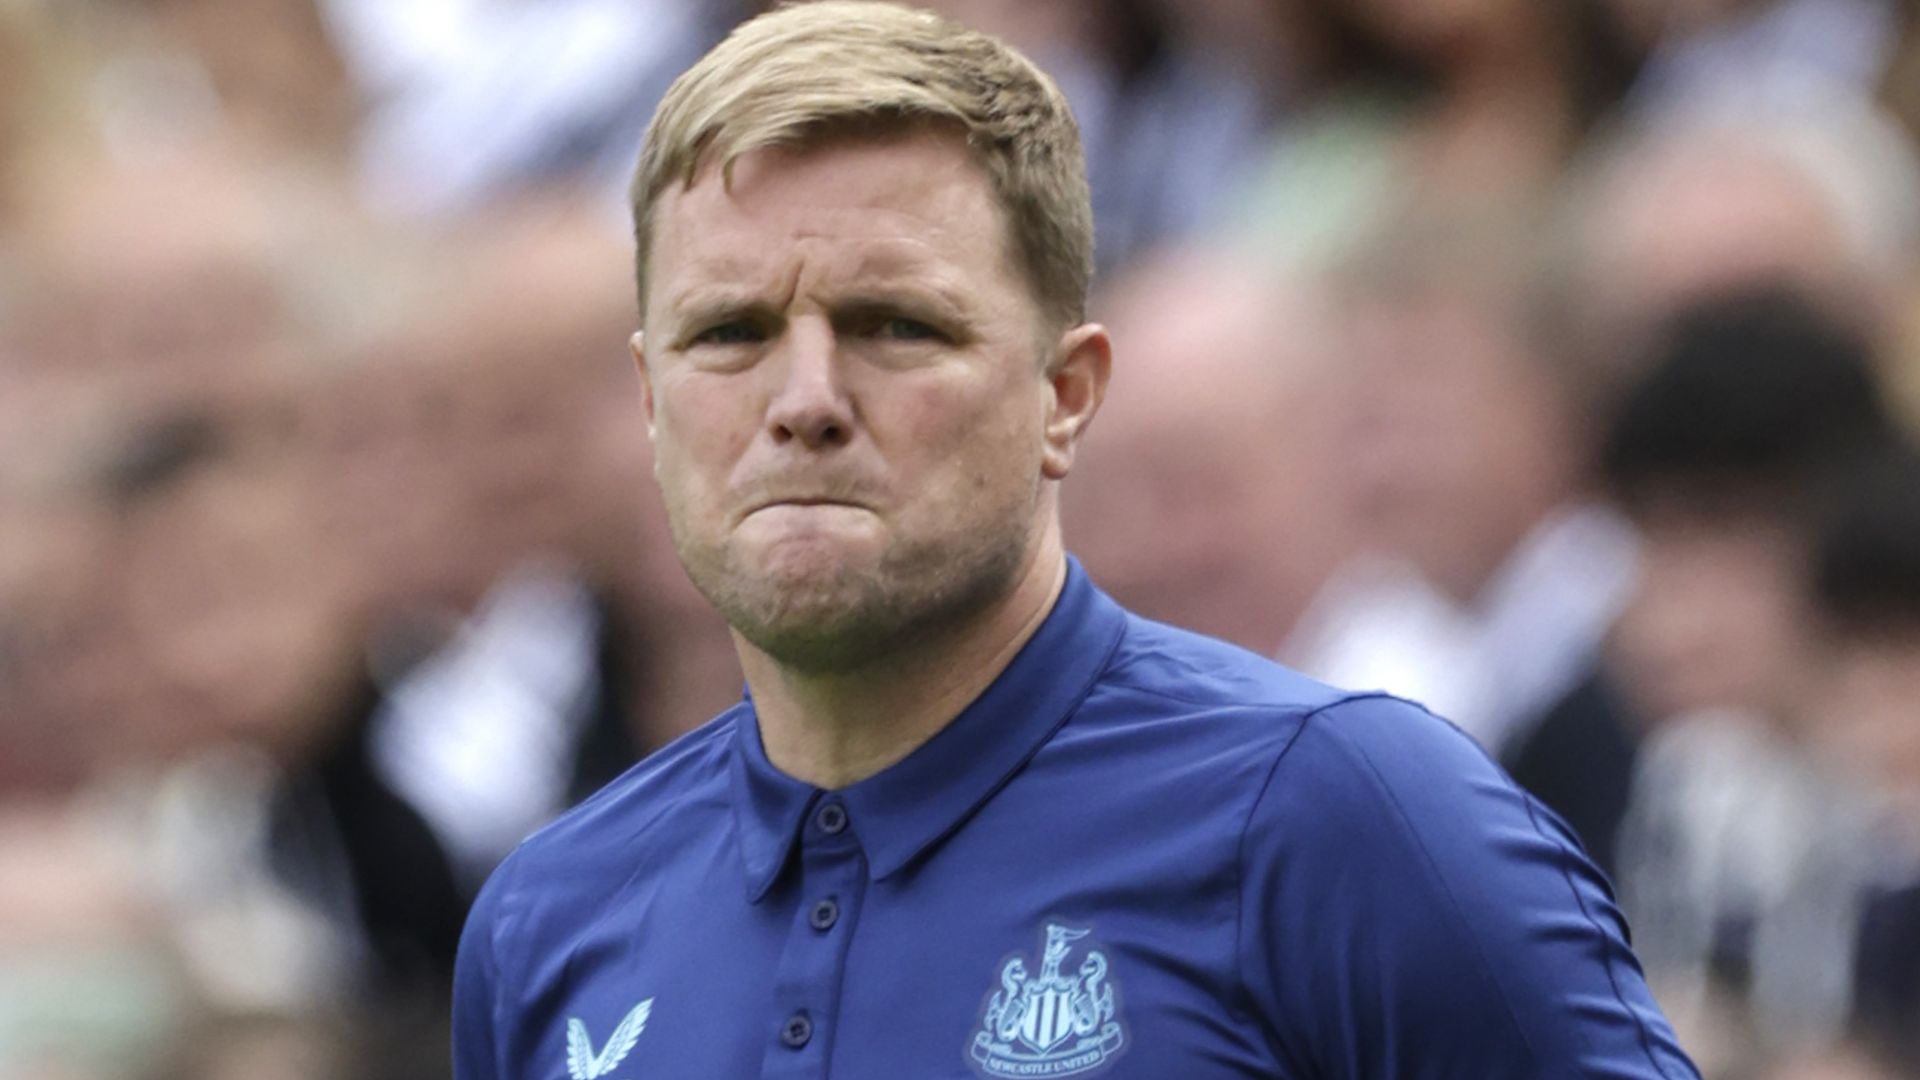 Can Newcastle be as big as Man Utd? Howe: There is no ceiling here